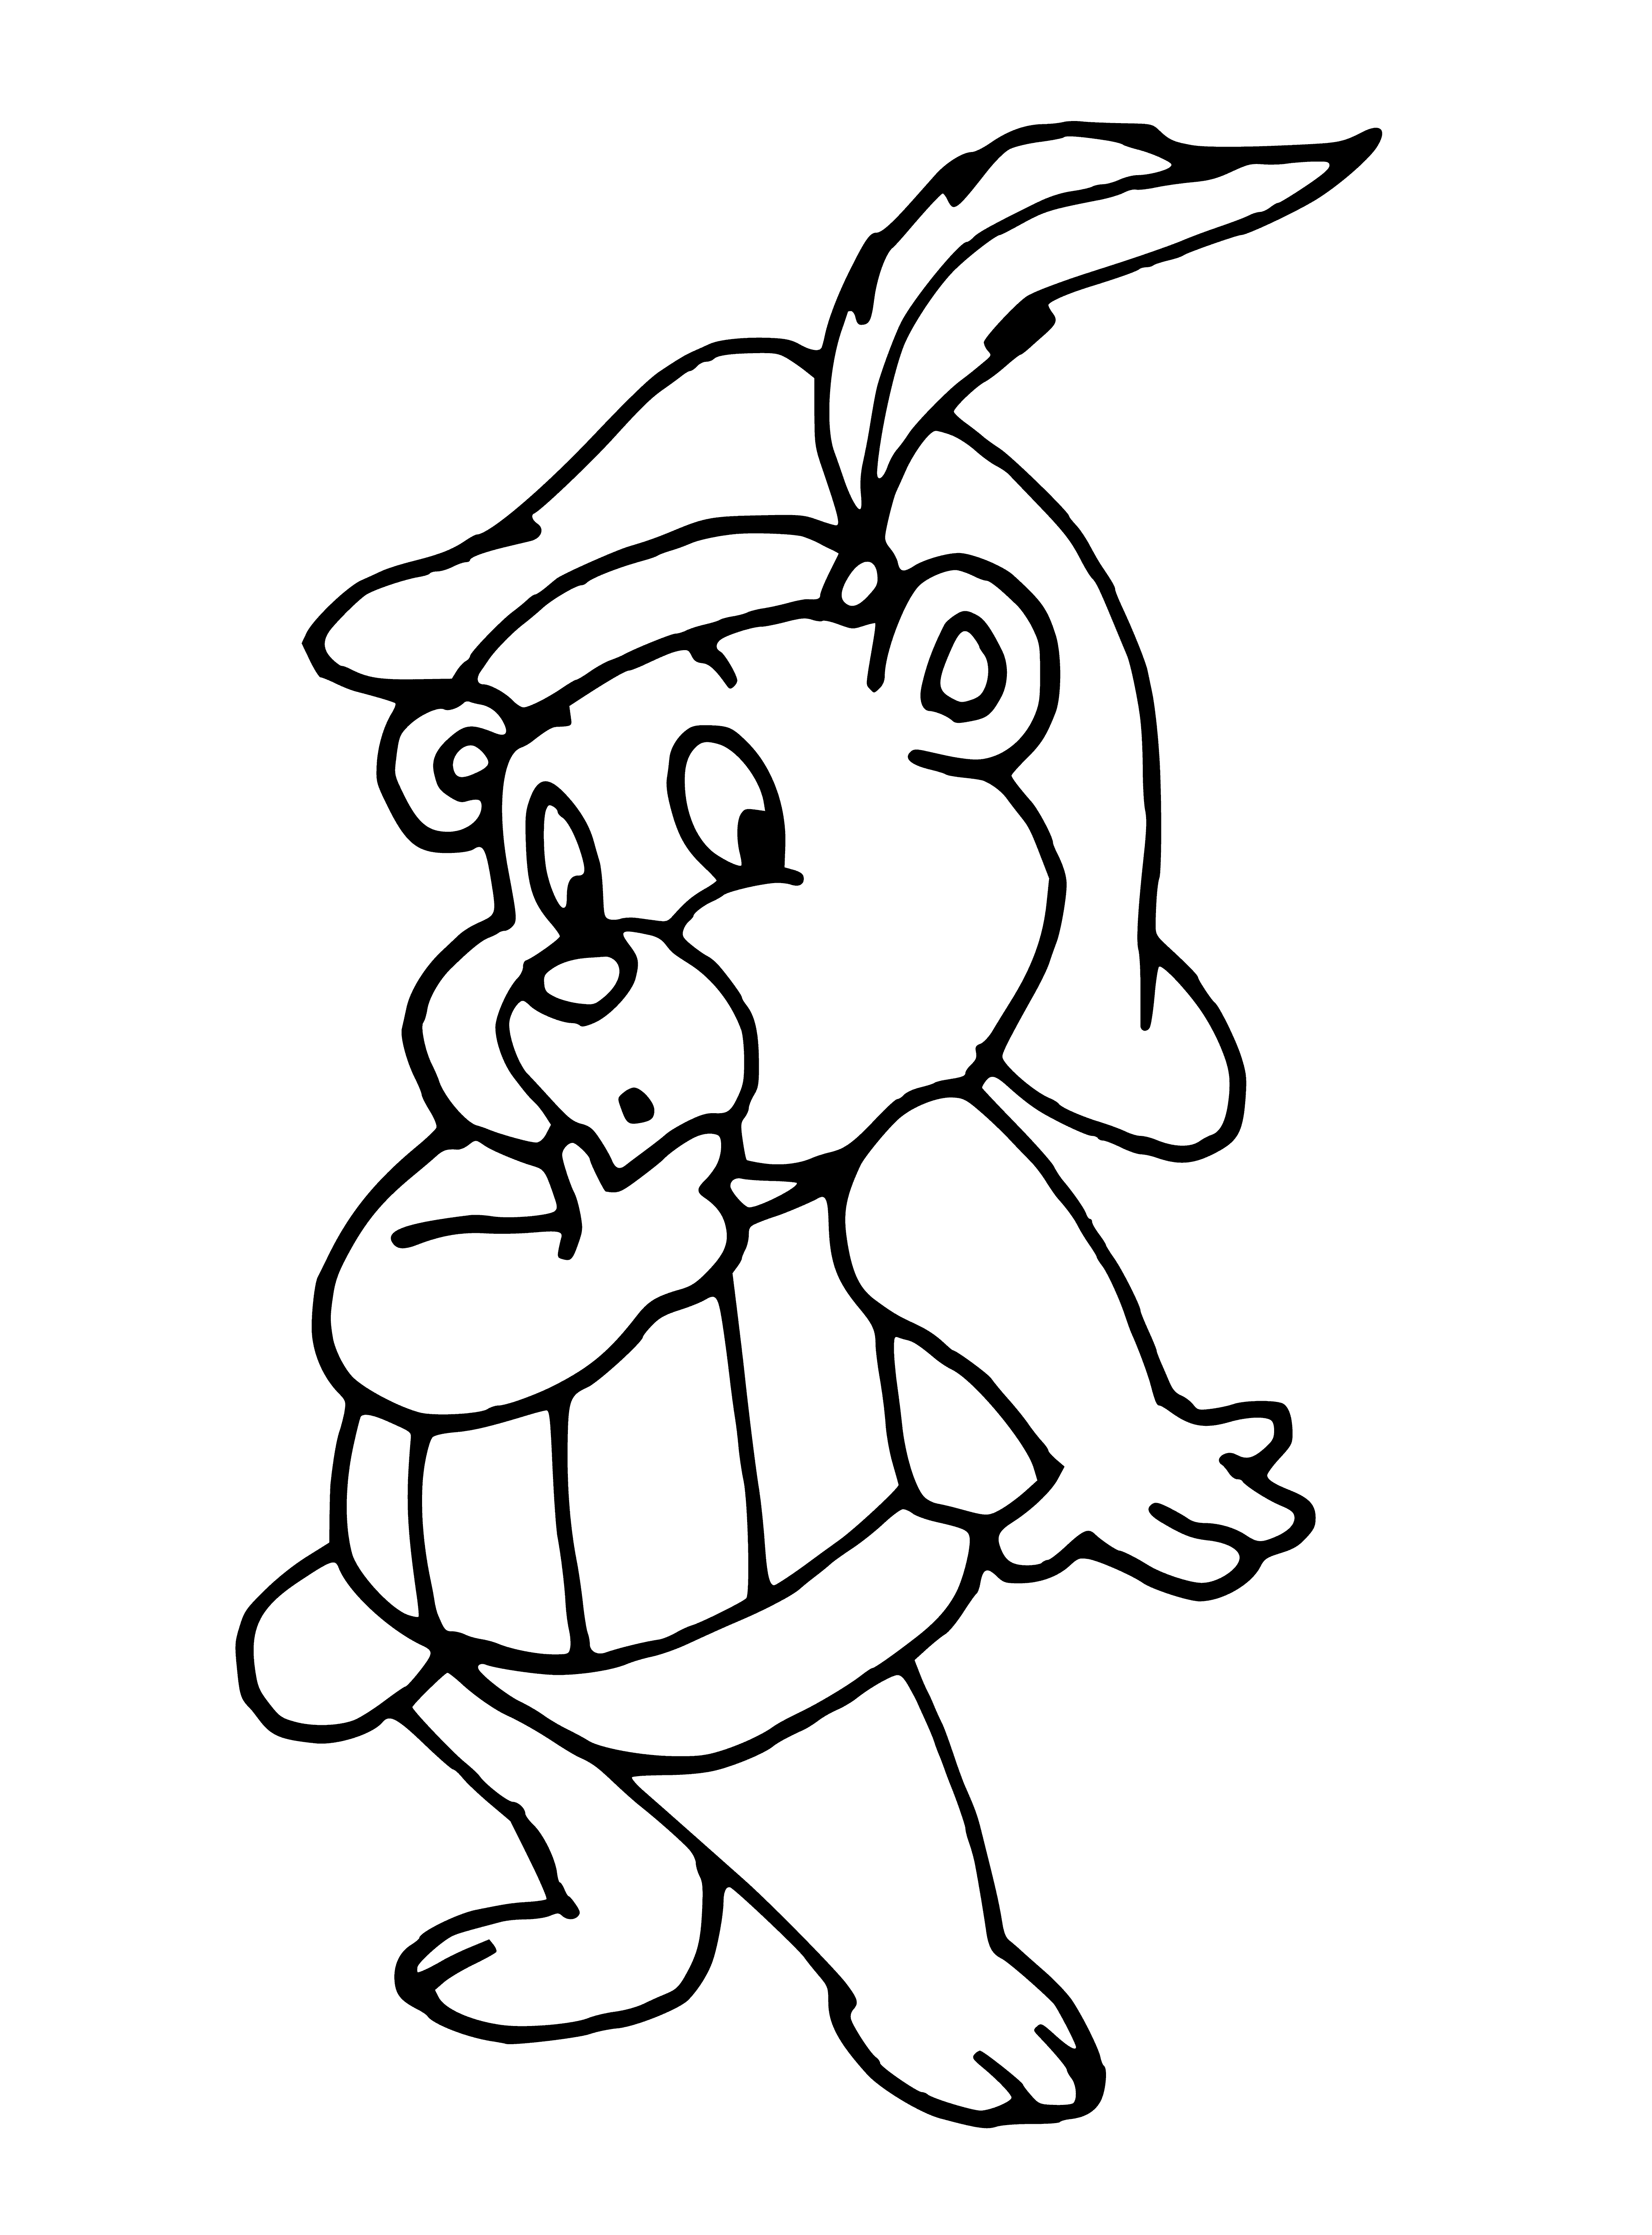 coloring page: The Gummi Bears are five anthropomorphic bears (red, yellow, green, orange, and purple) who have adventures in the forest of Gummiwald.